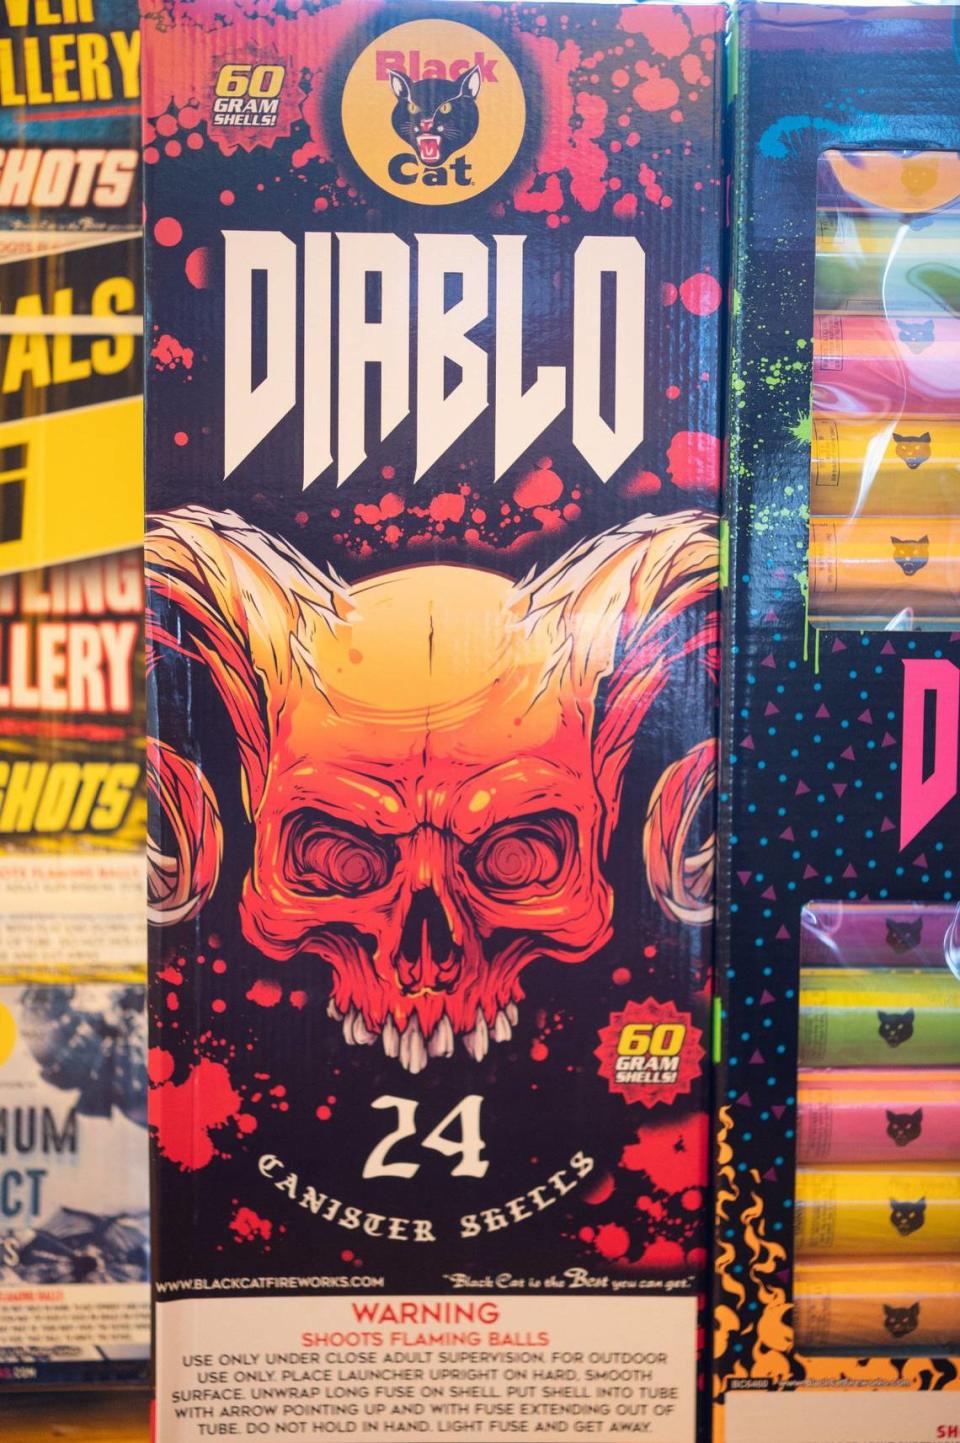 The Diablo, a shell-firework cartridge manufactured by Black Cat and known for its extremely loud explosions, was a popular choice at the fireworks stand near Rainbow Boulevard and Southwest Boulevard in Kansas City, Kansas.